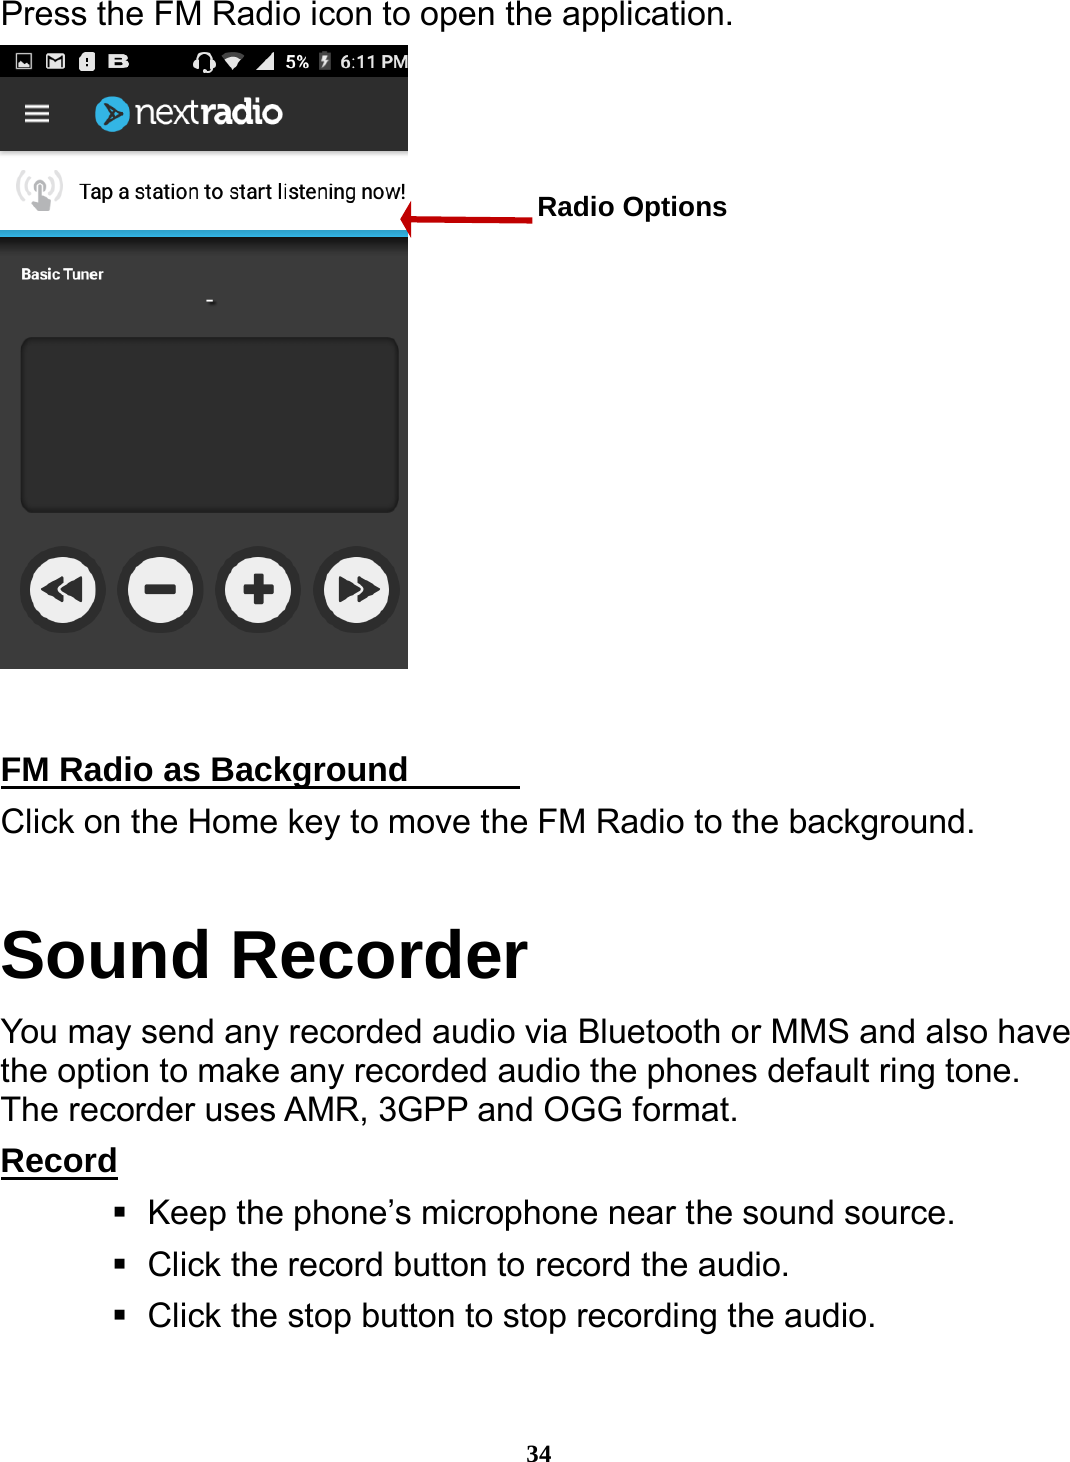  34 Press the FM Radio icon to open the application.   FM Radio as Background                                       Click on the Home key to move the FM Radio to the background. Sound Recorder You may send any recorded audio via Bluetooth or MMS and also have the option to make any recorded audio the phones default ring tone. The recorder uses AMR, 3GPP and OGG format. Record                                                                Keep the phone’s microphone near the sound source.    Click the record button to record the audio.    Click the stop button to stop recording the audio. Radio Options 